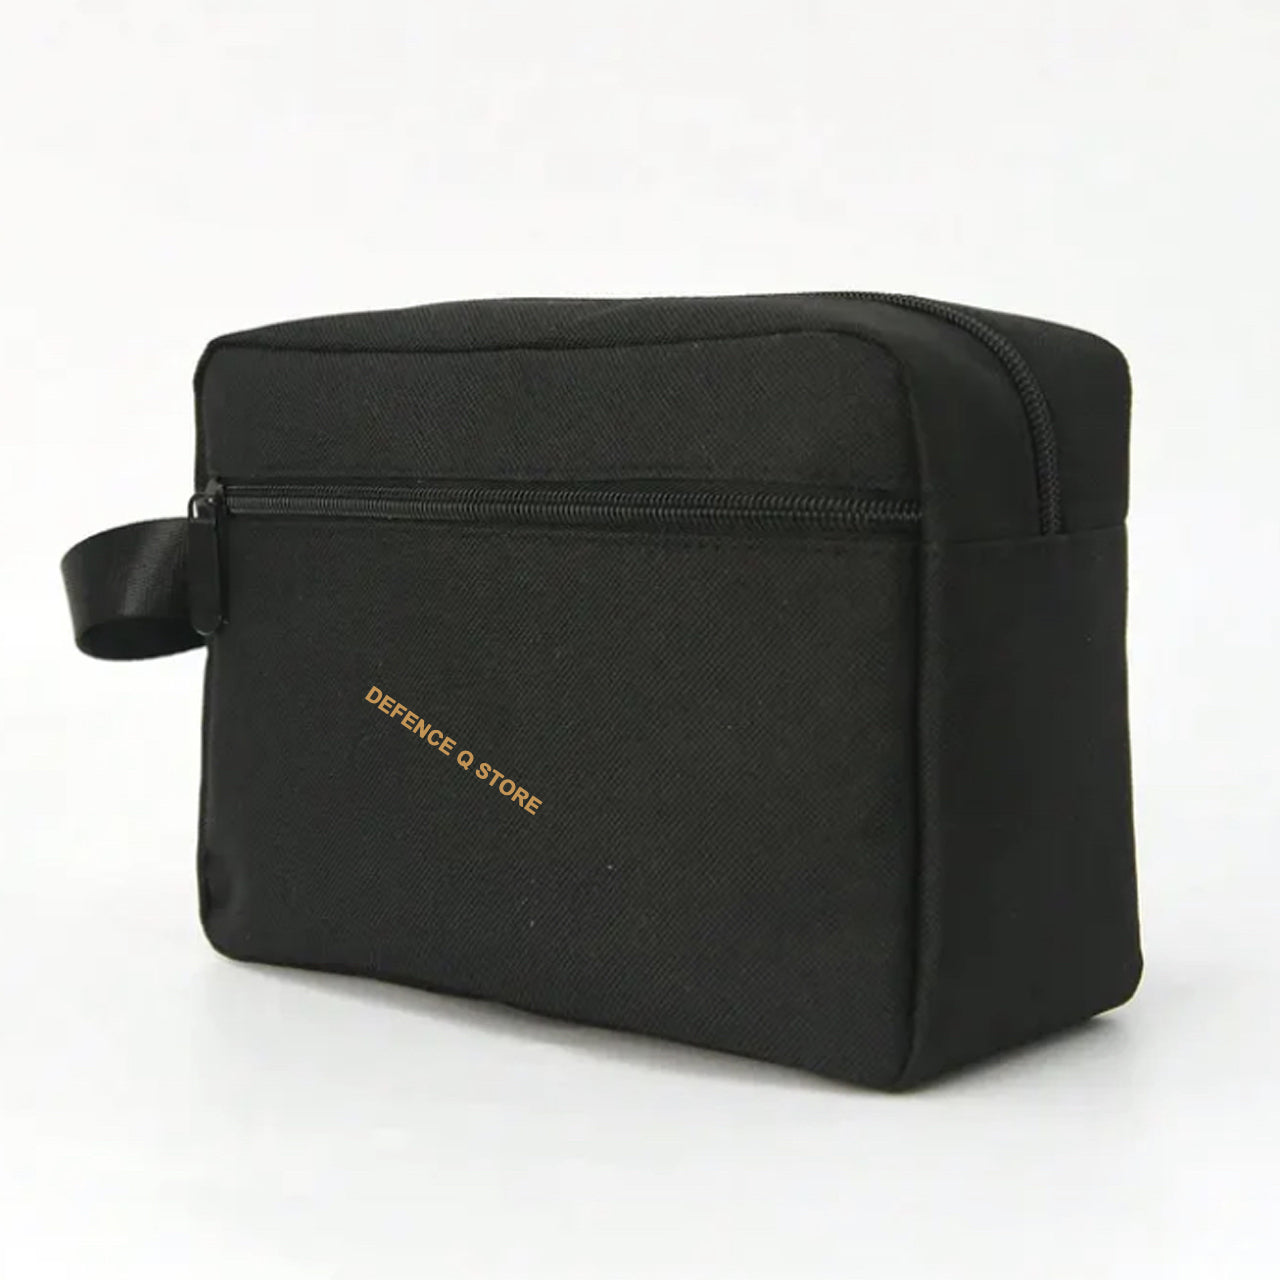 This Toiletry Bag Black is a must-have for any traveler. With dimensions of 16.5cm (H) x 23cm (W) x 9cm (D), it's perfect for storing toiletries and accessories. Made from 100% Polyester, it boasts a sleek and durable design. The side carry handle, front pocket compartment with closeable zip, and top zip closure make it a convenient and stylish choice. www.defenceqstore.com.au